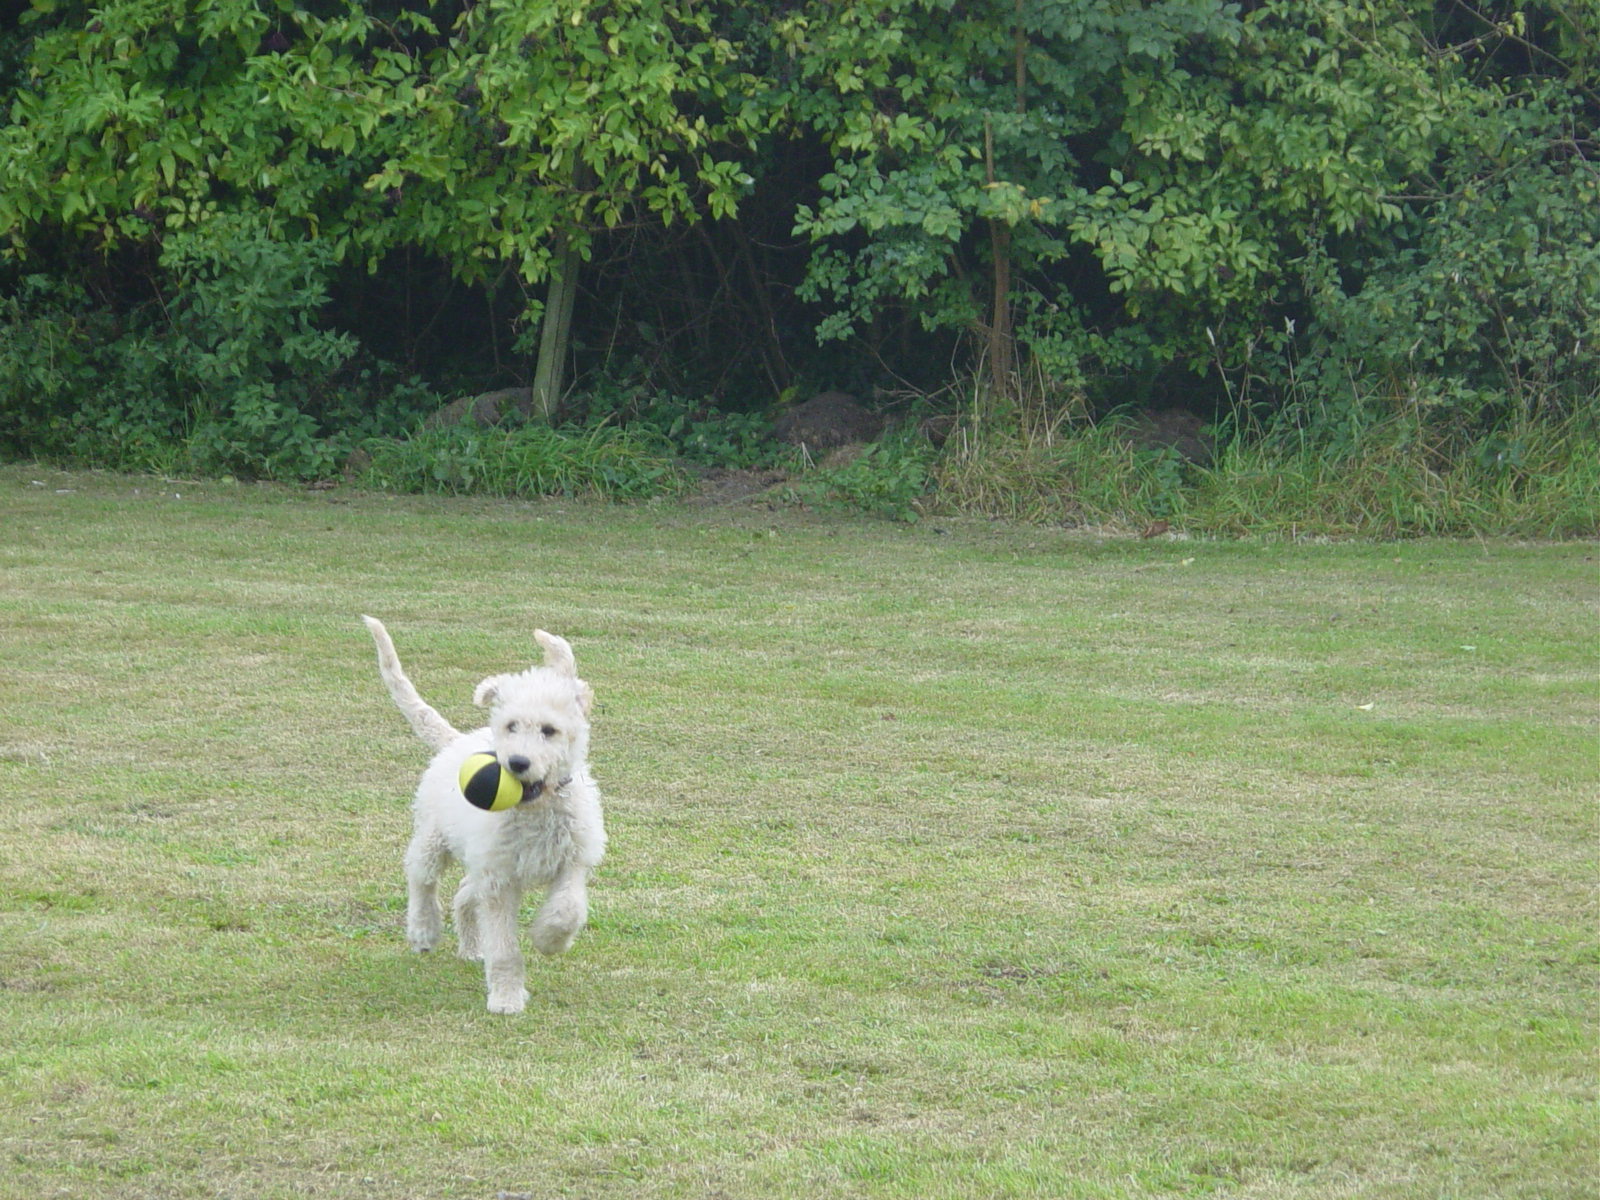 Playing with my ball in the field